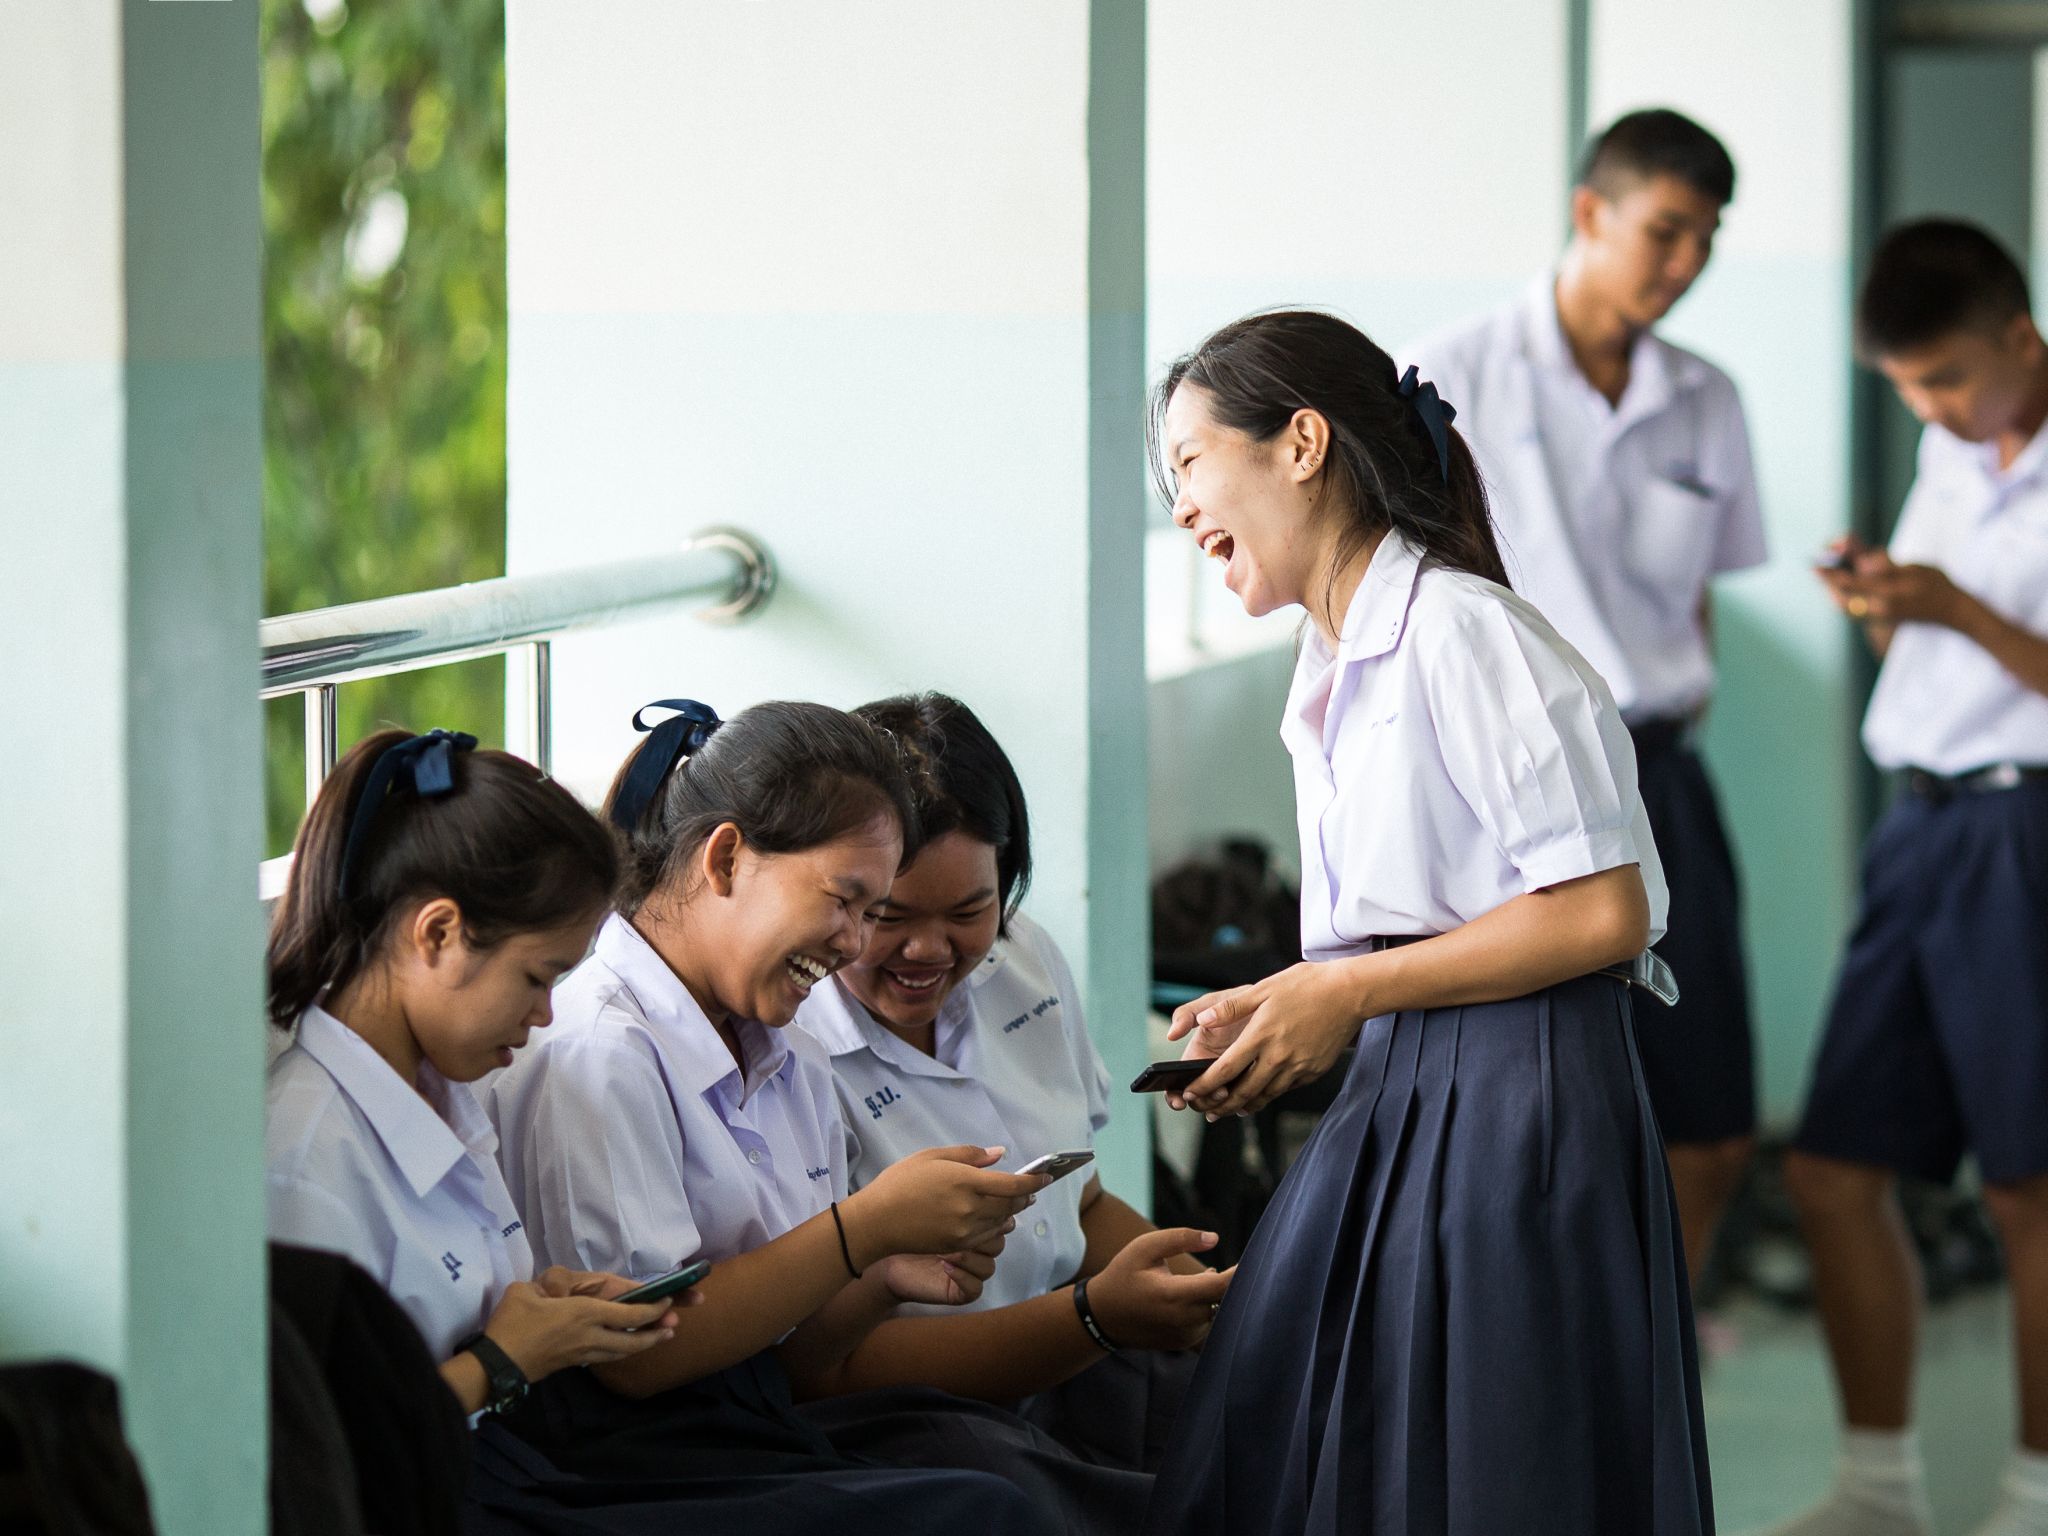 Children and adolescents in Thailand use a lot of social media during their free time to keep up with the latest trends and to stay connected. 